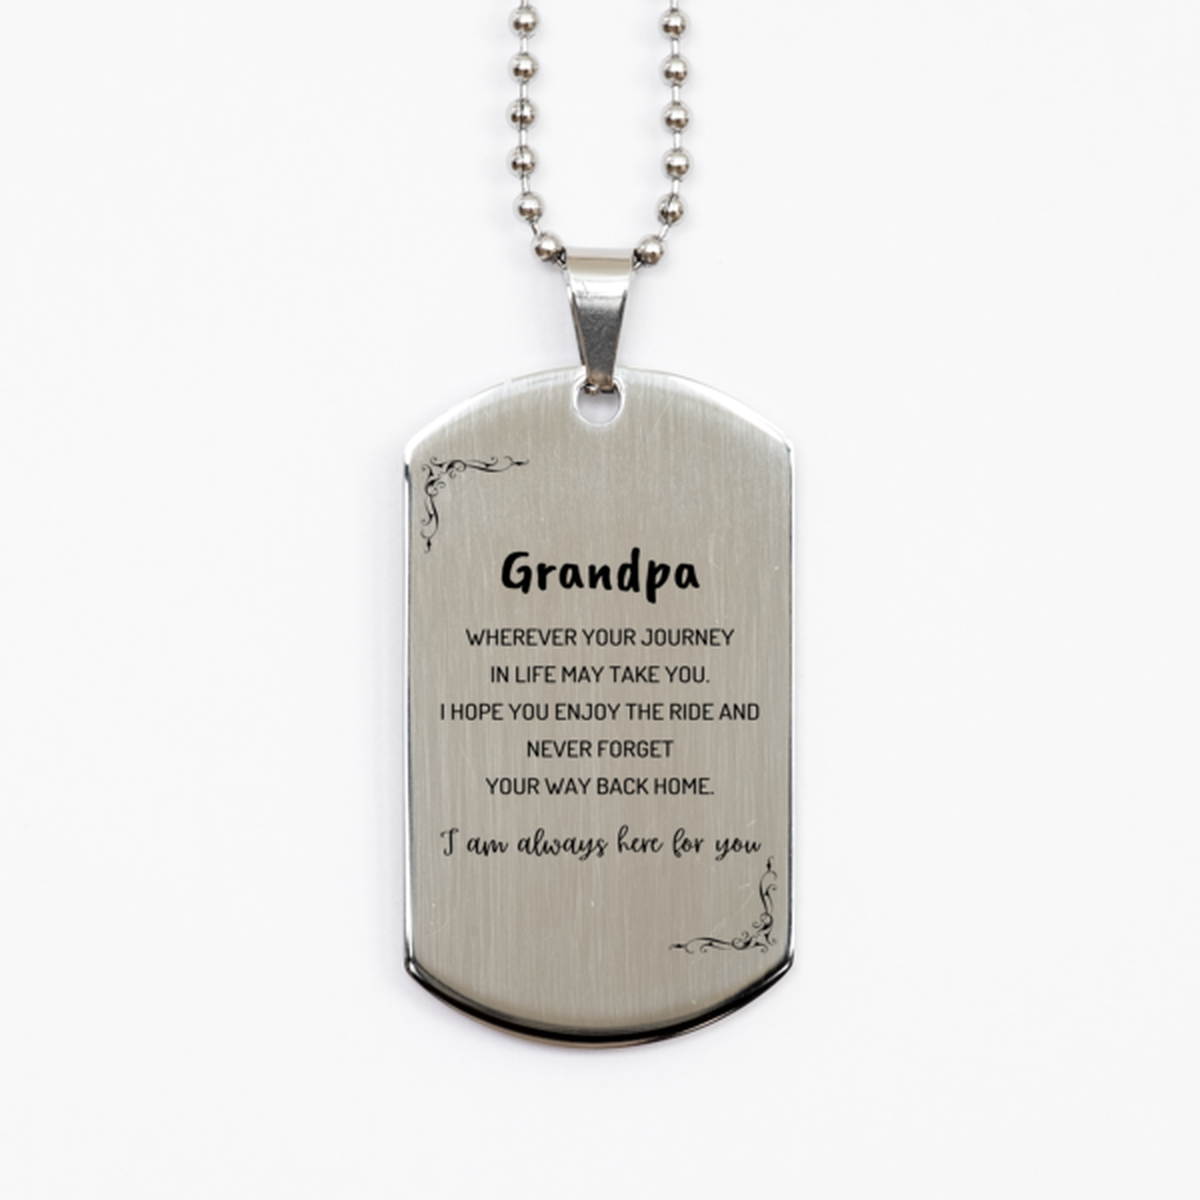 Grandpa wherever your journey in life may take you, I am always here for you Grandpa Silver Dog Tag, Awesome Christmas Gifts For Grandpa, Grandpa Birthday Gifts for Men Women Family Loved One